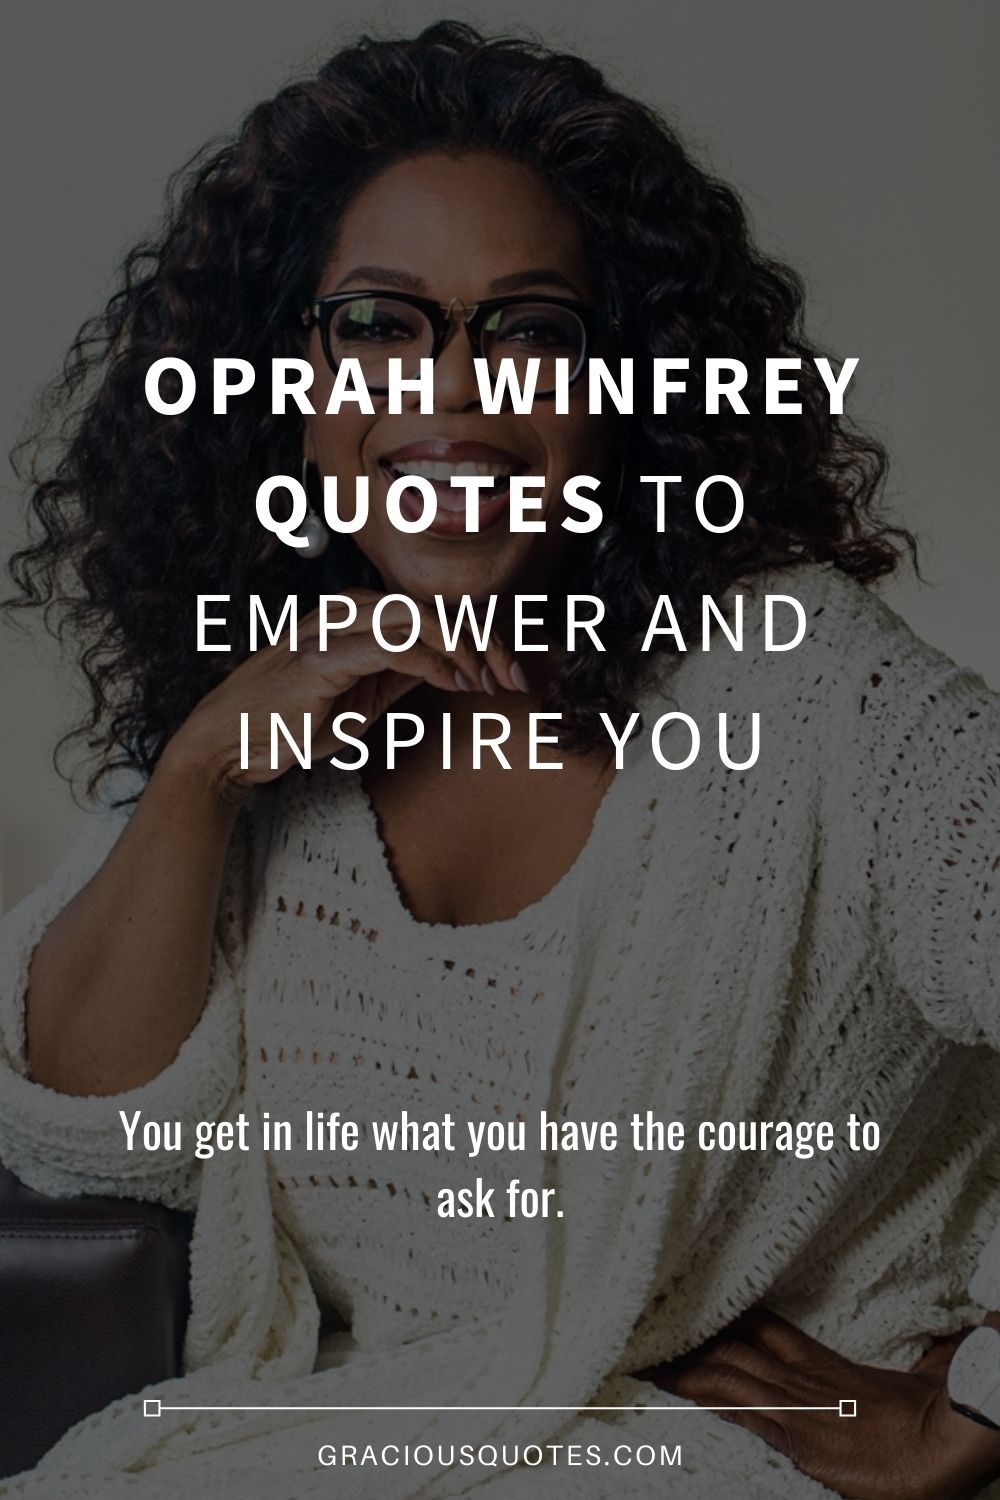 Oprah-Winfrey-Quotes-to-Empower-And-Inspire-You-Edited